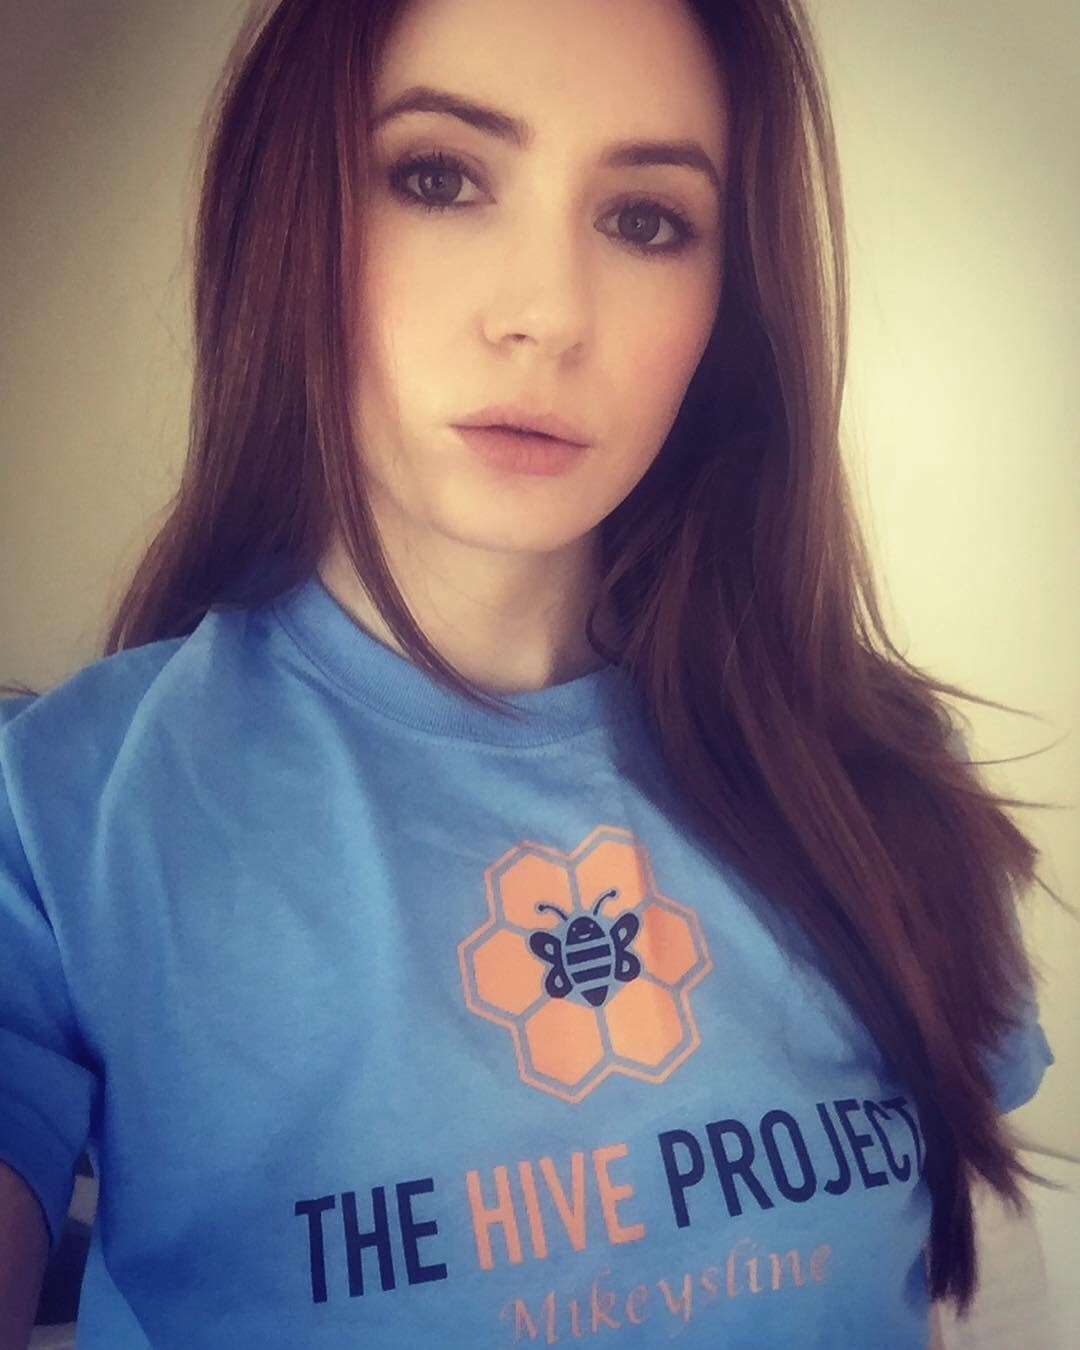 Karen Gillan paid tribute to the work of Mikeysline